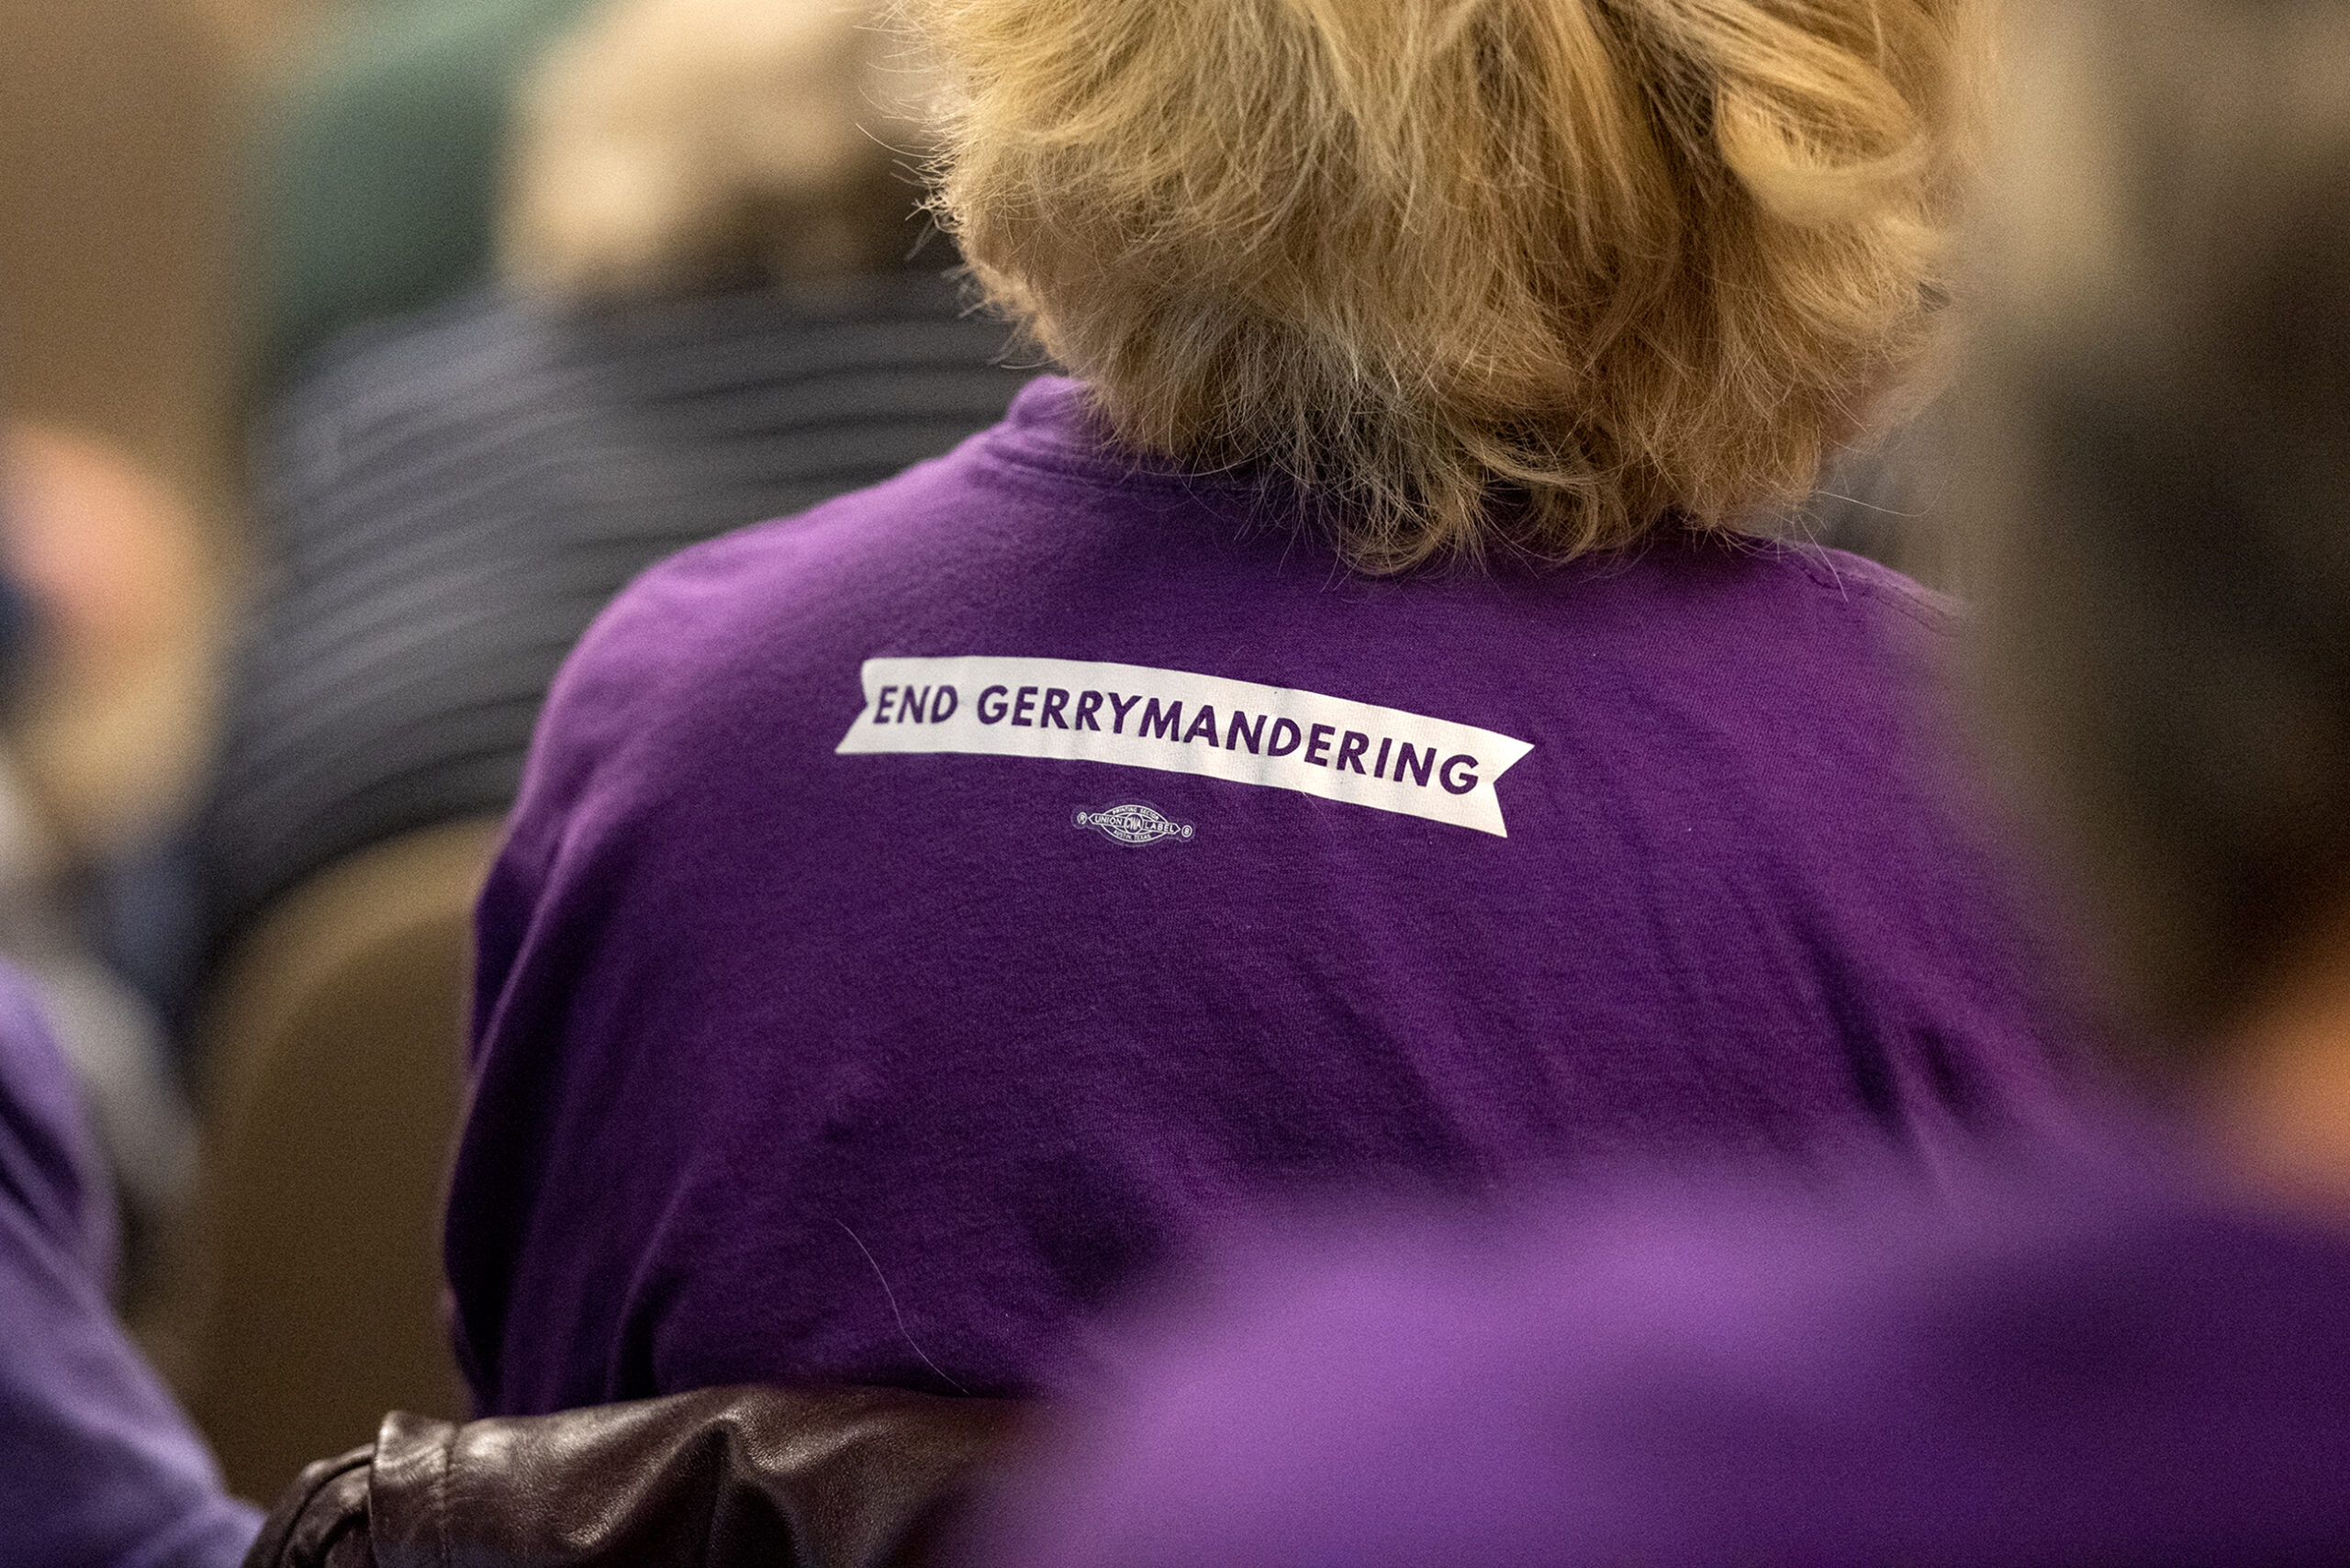 An attendee wears a purple shirt that says 